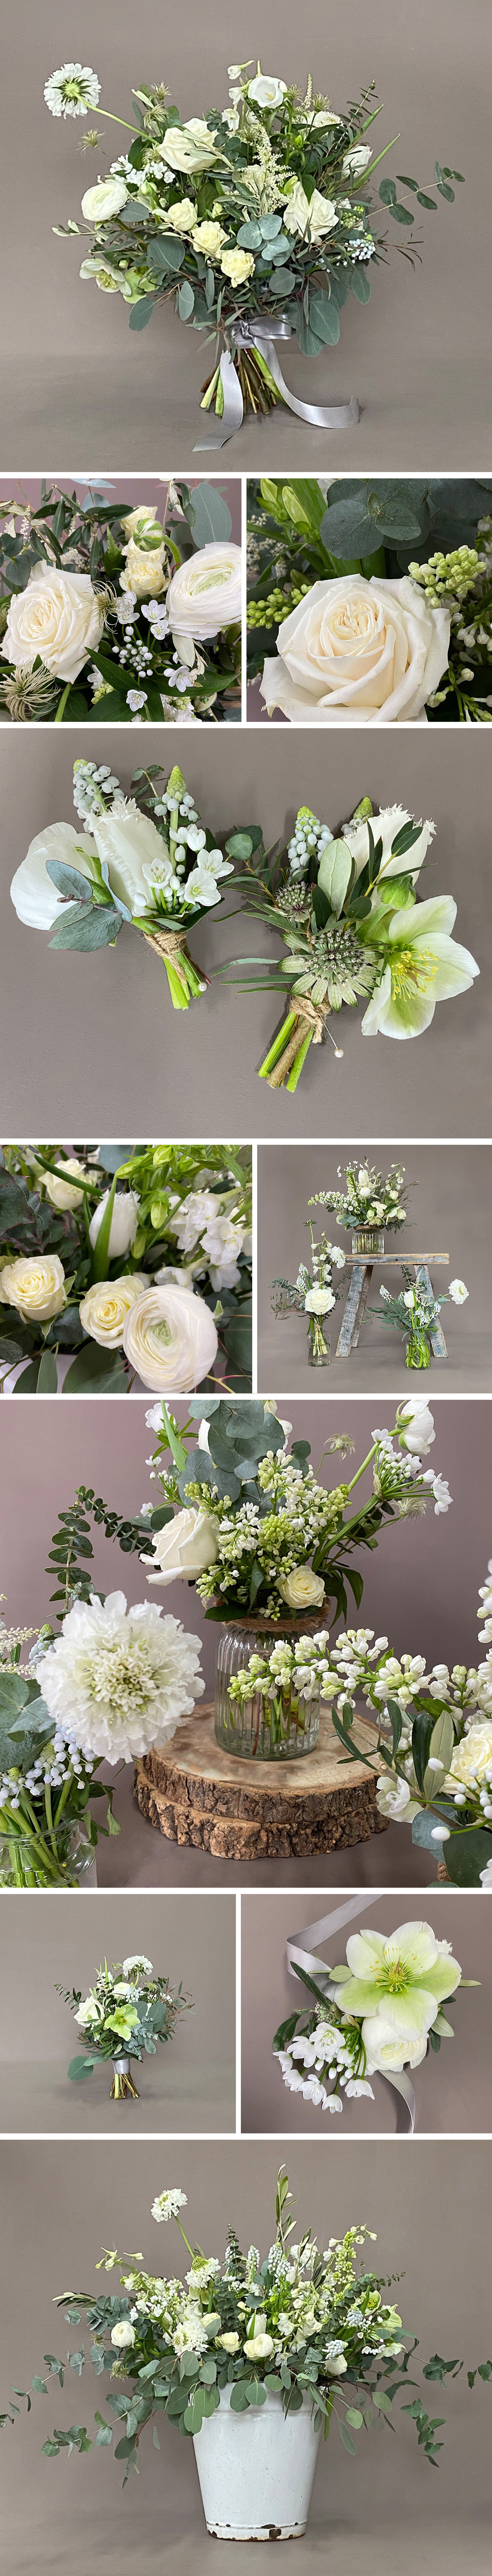 white wedding flowers collection